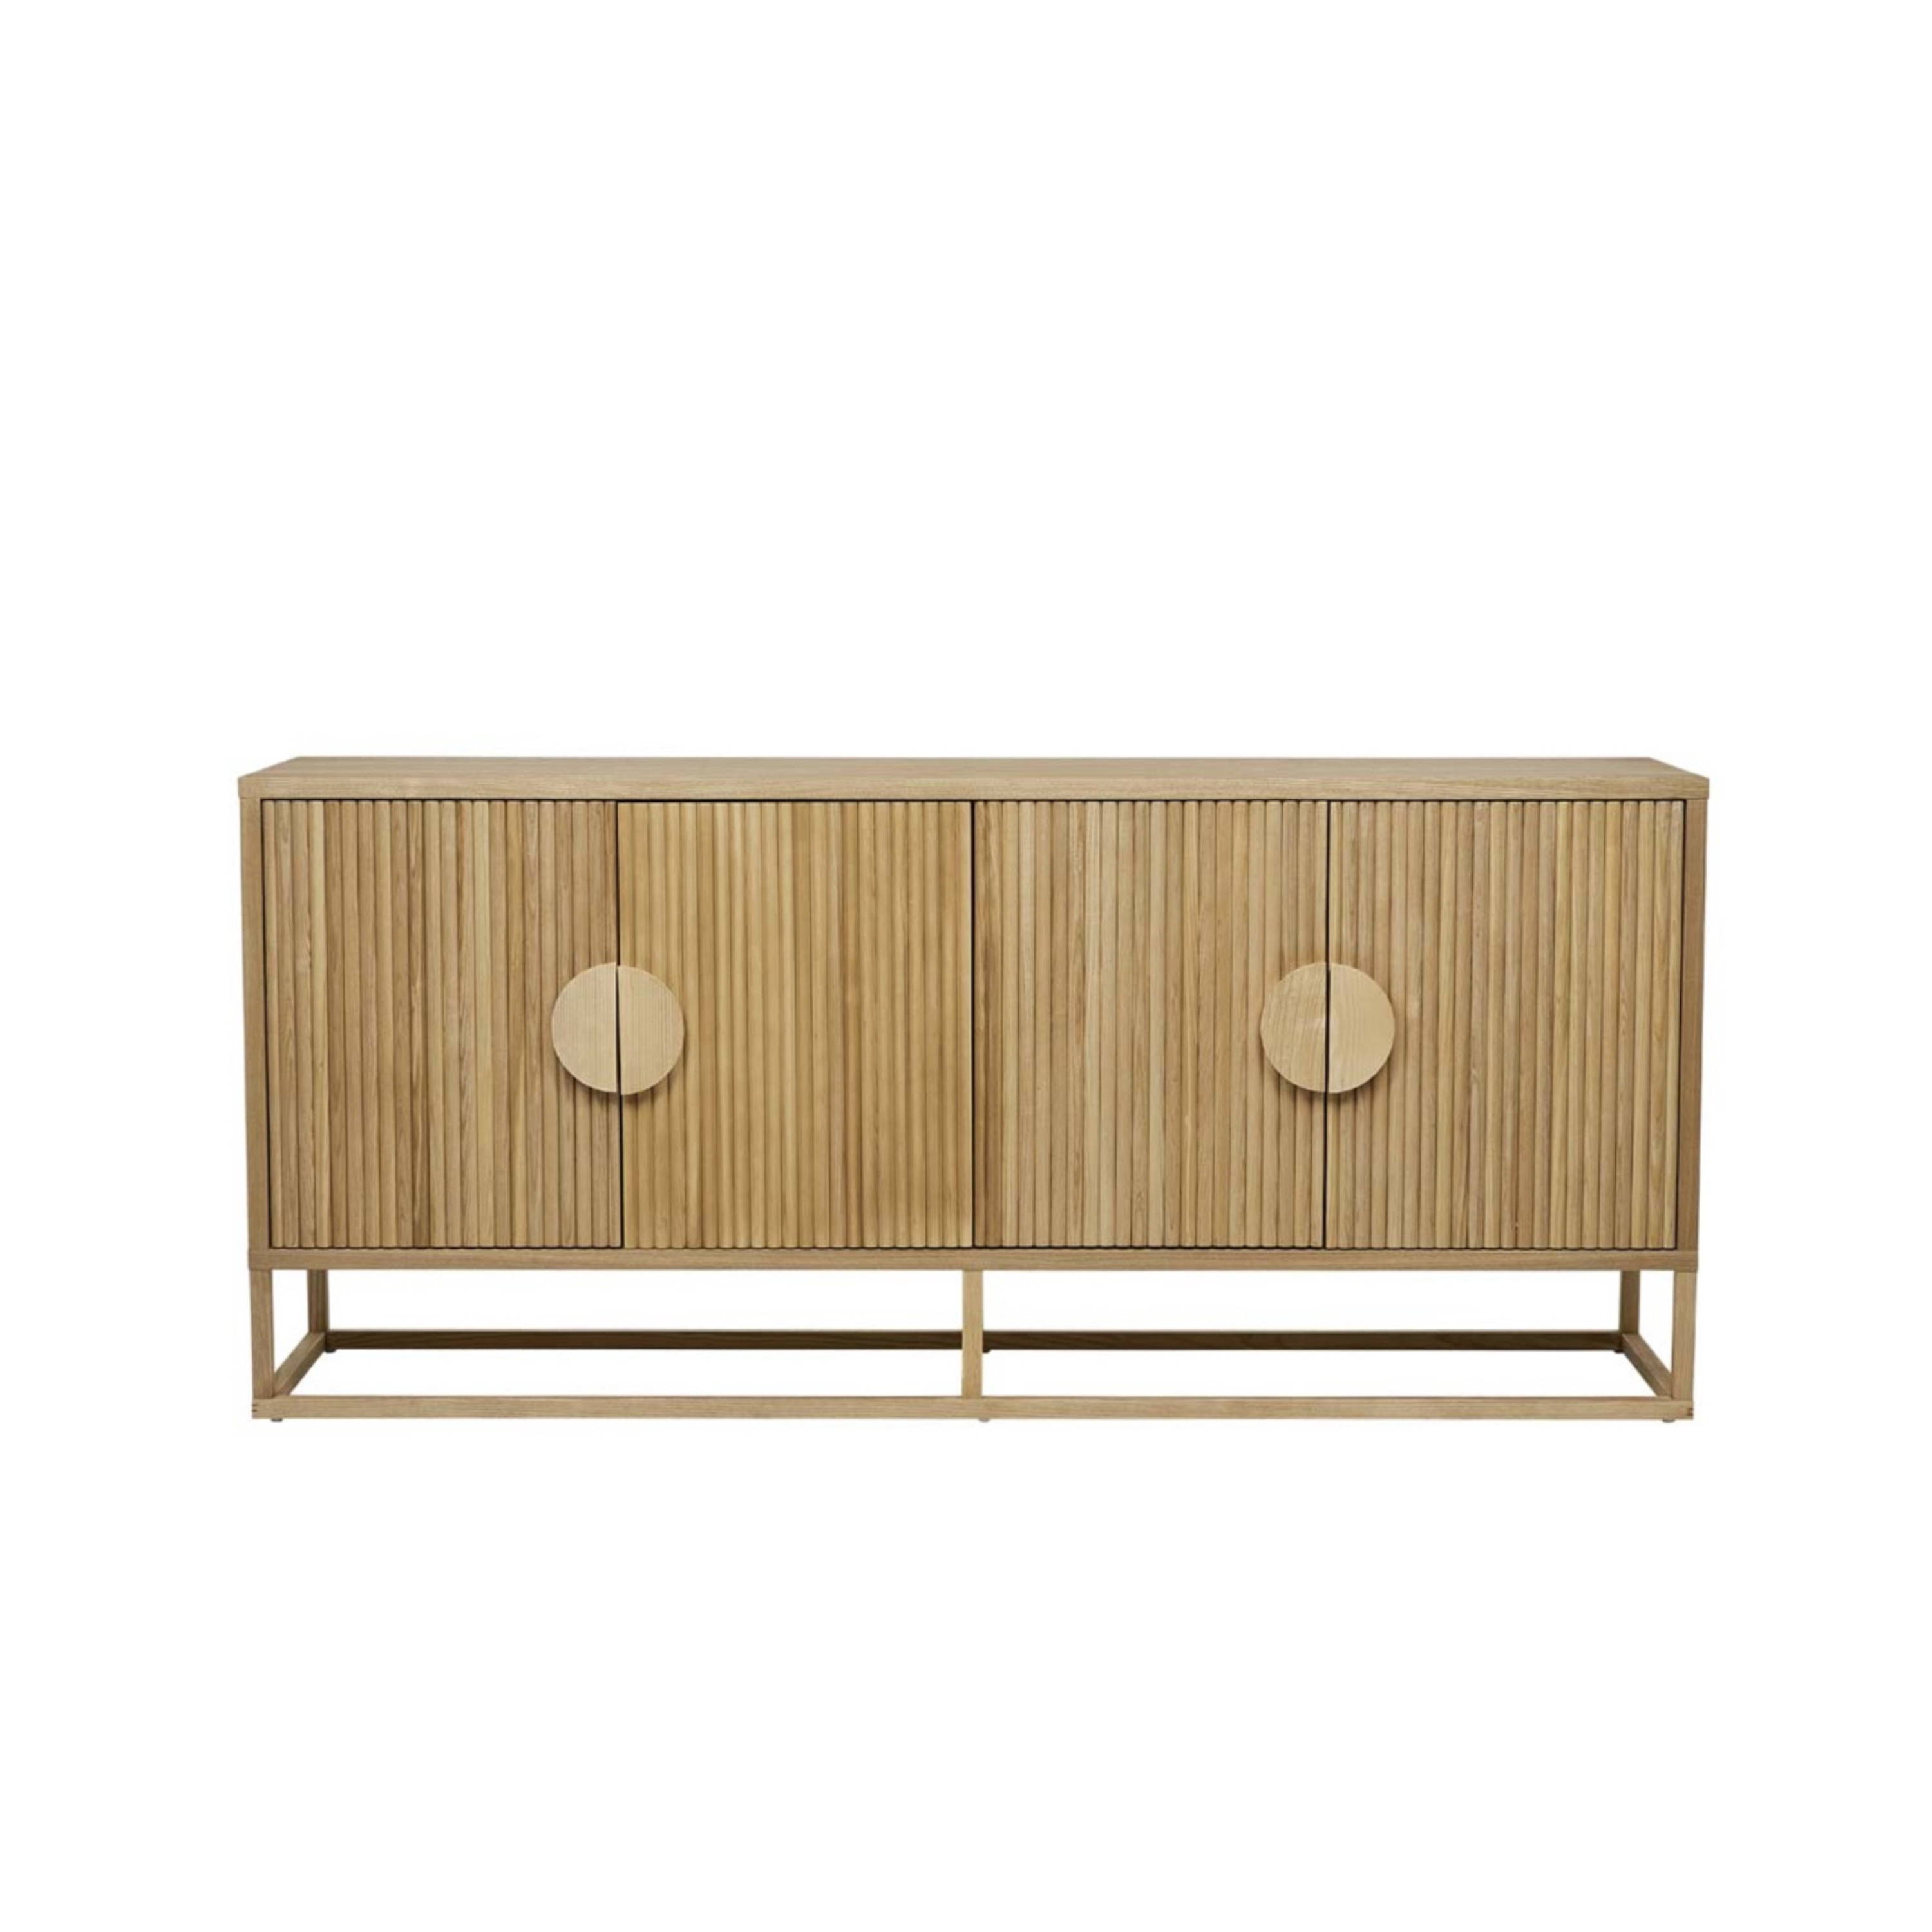 Benjamin Buffet by GlobeWest - Modern Buffet with round handle features on cupboards